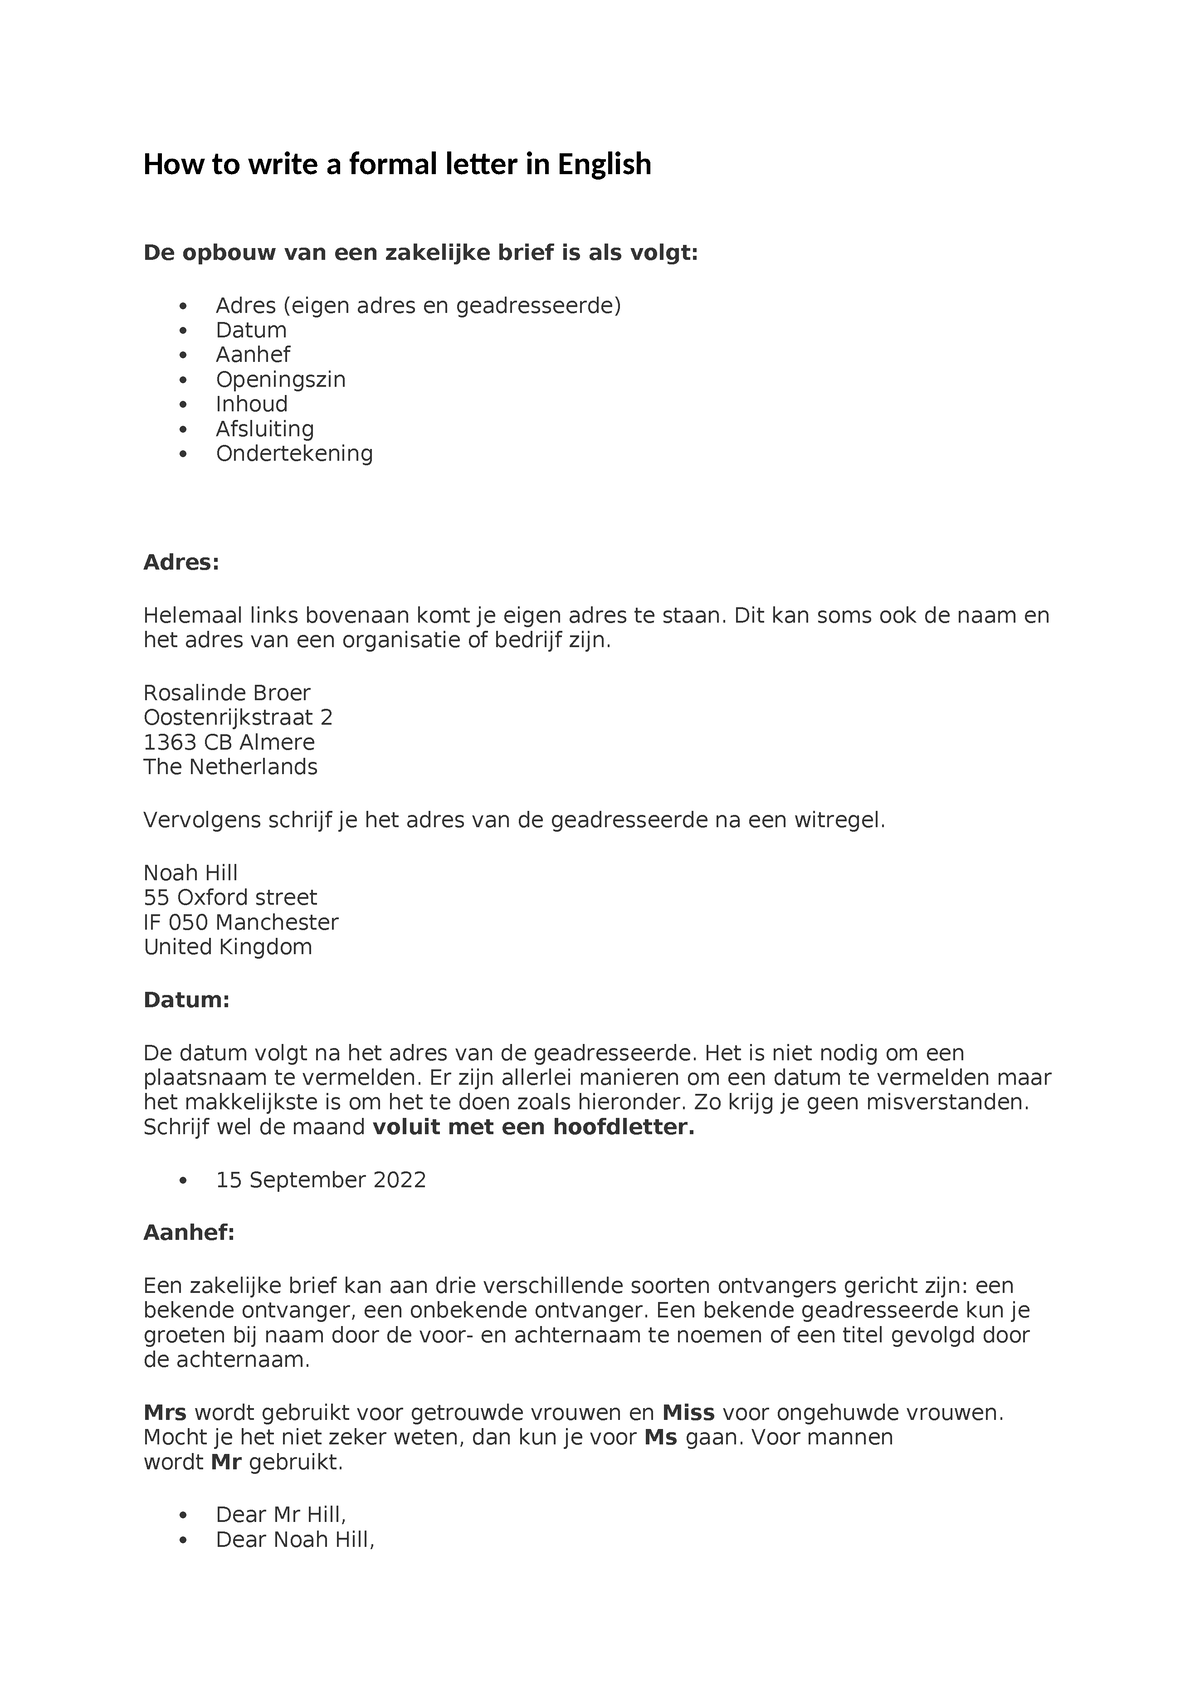 how-to-write-a-formal-letter-in-english-dit-kan-soms-ook-de-naam-en